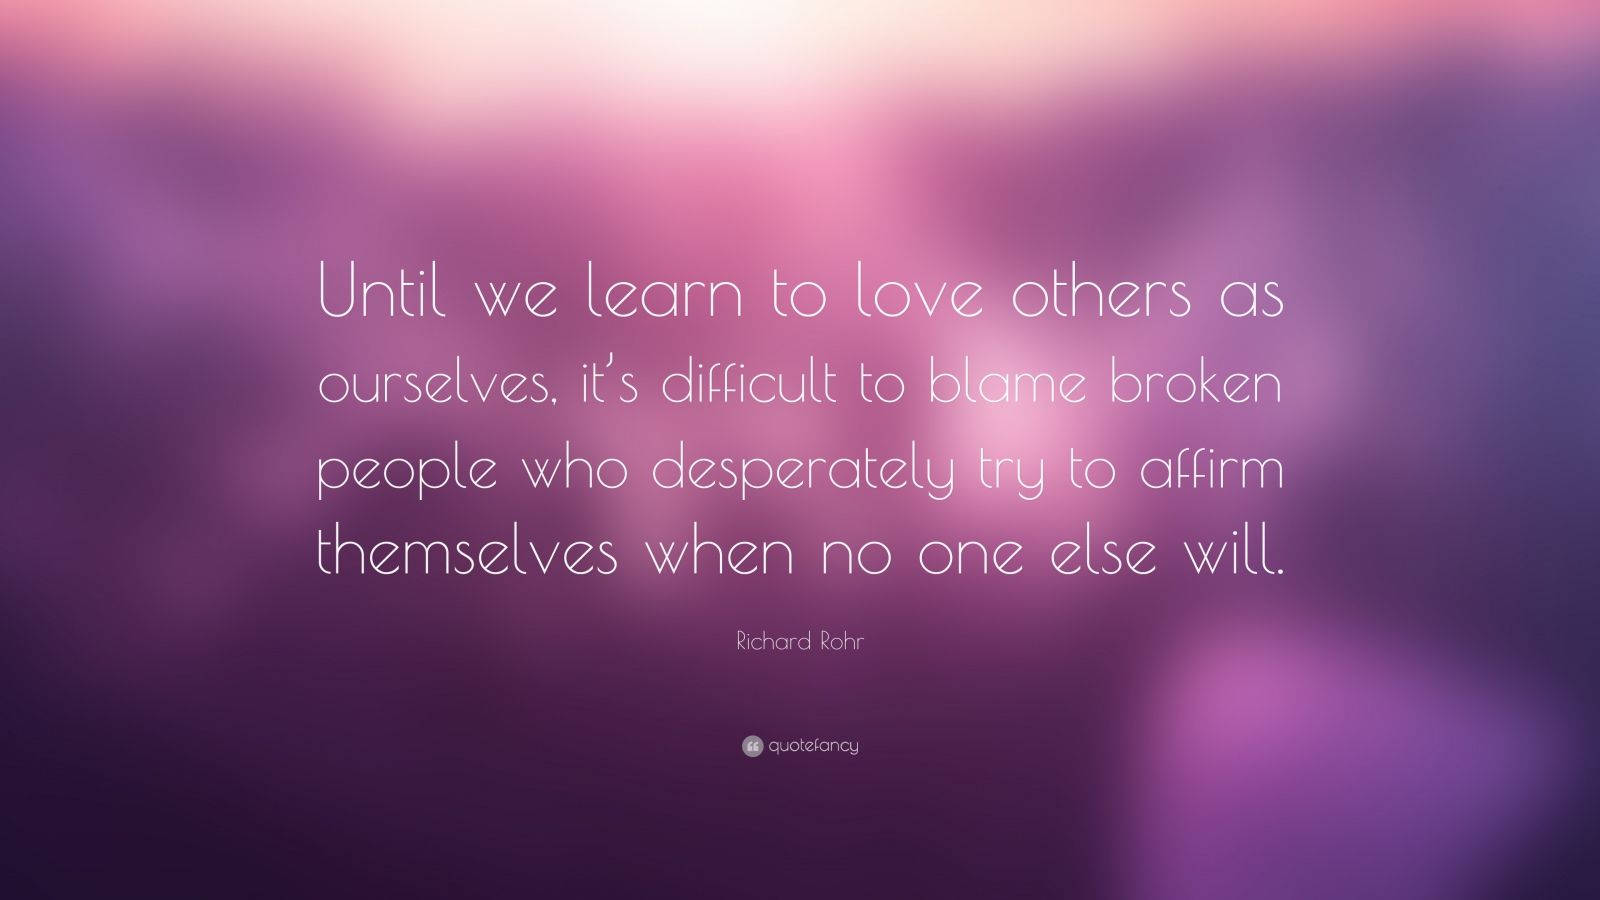 Richard Rohr Quote: “Until we learn to love others as ourselves, it’s ...